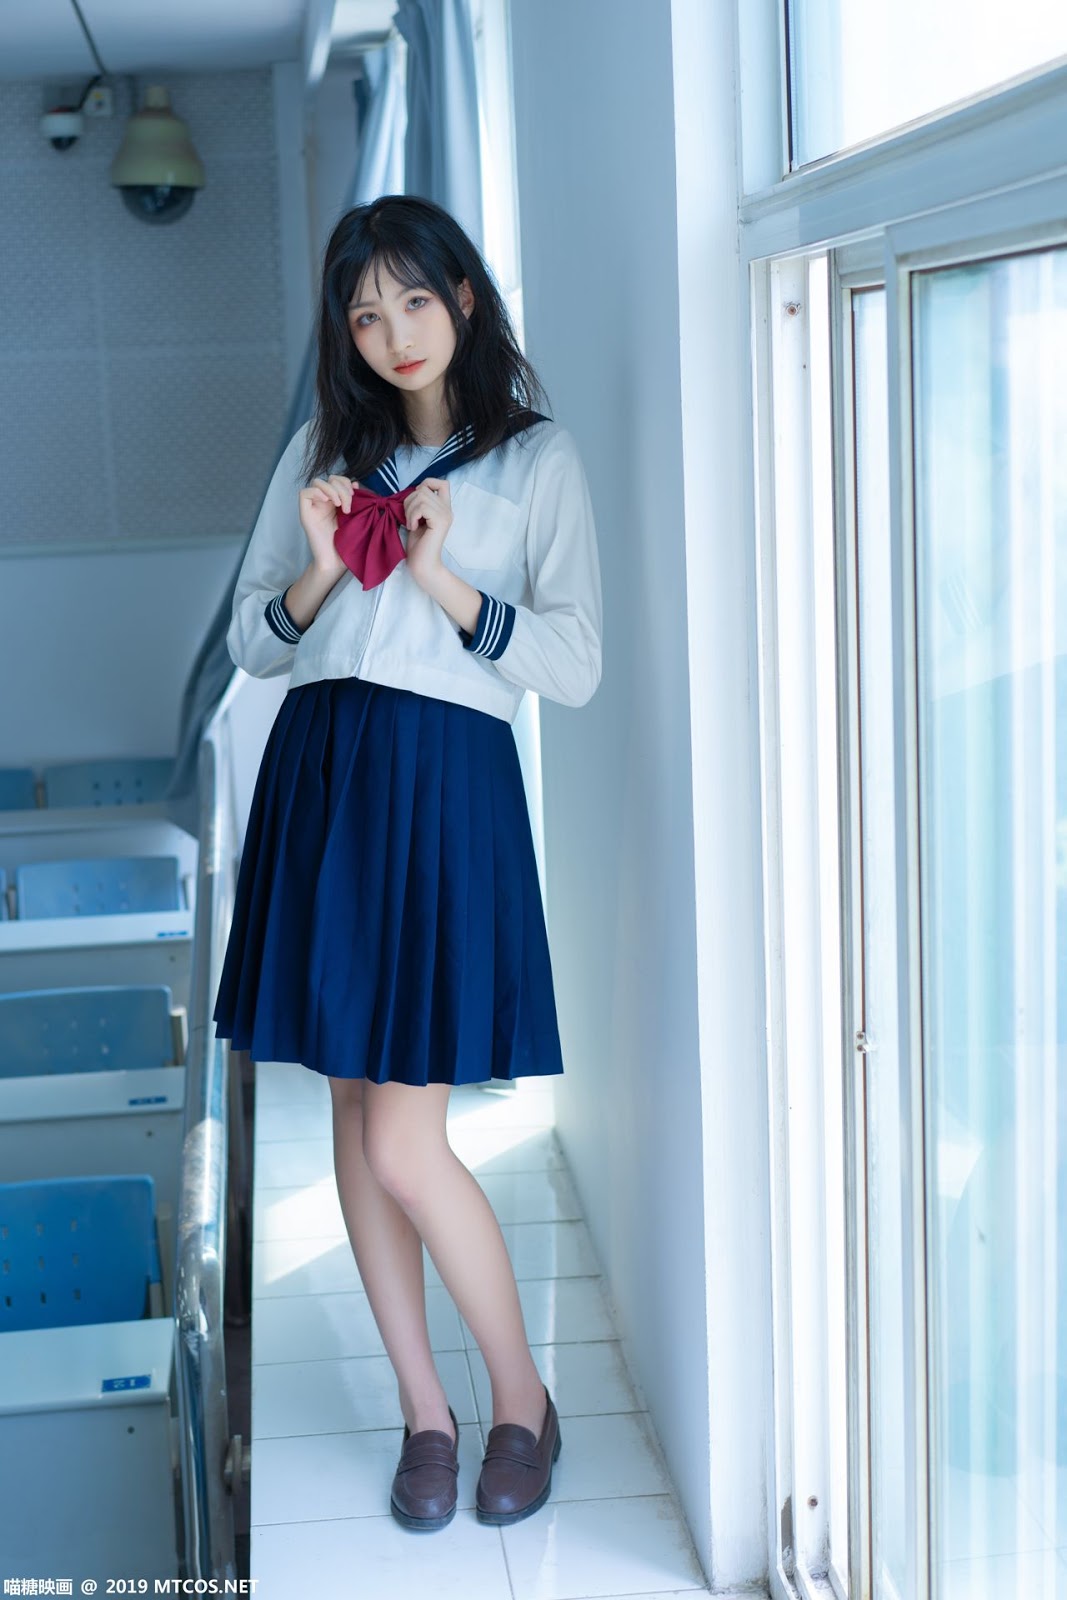 Image MTCos 喵糖映画 Vol.014 – Chinese Cute Model With Japanese School Uniform - TruePic.net- Picture-12